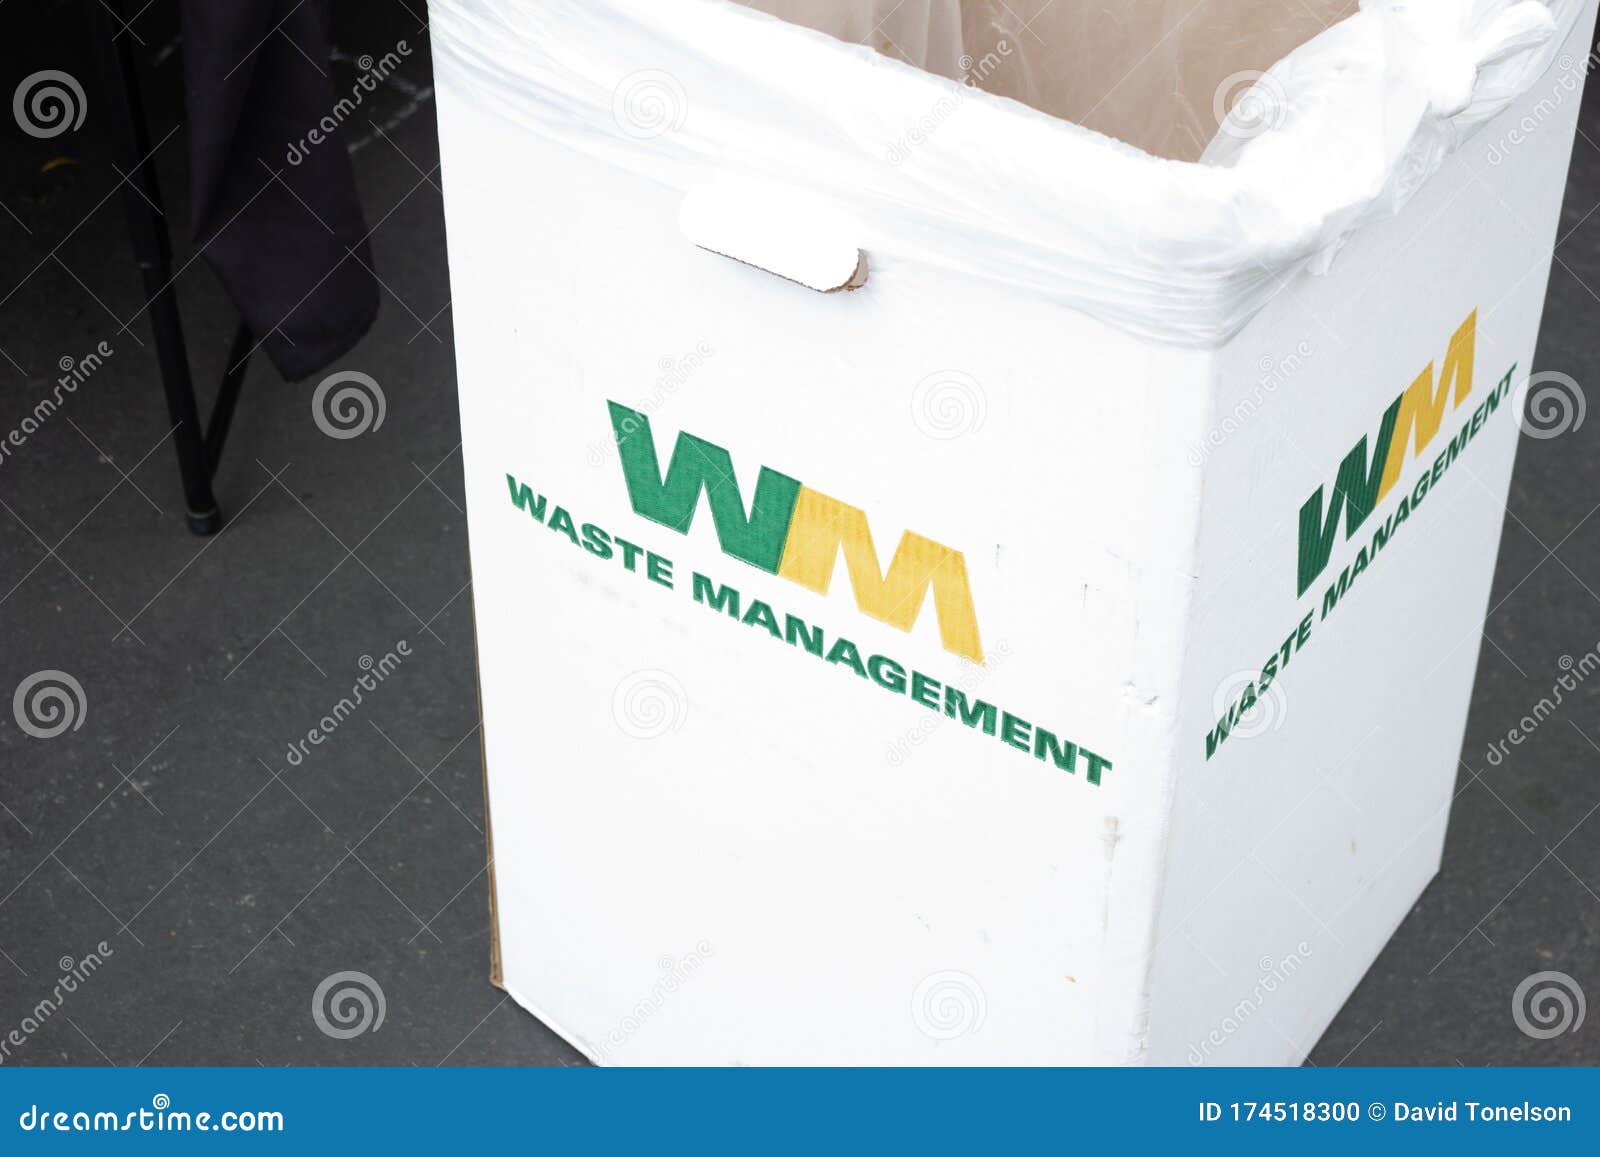 https://thumbs.dreamstime.com/z/view-event-style-cardboard-trash-can-logo-waste-management-located-los-angeles-california-waste-174518300.jpg